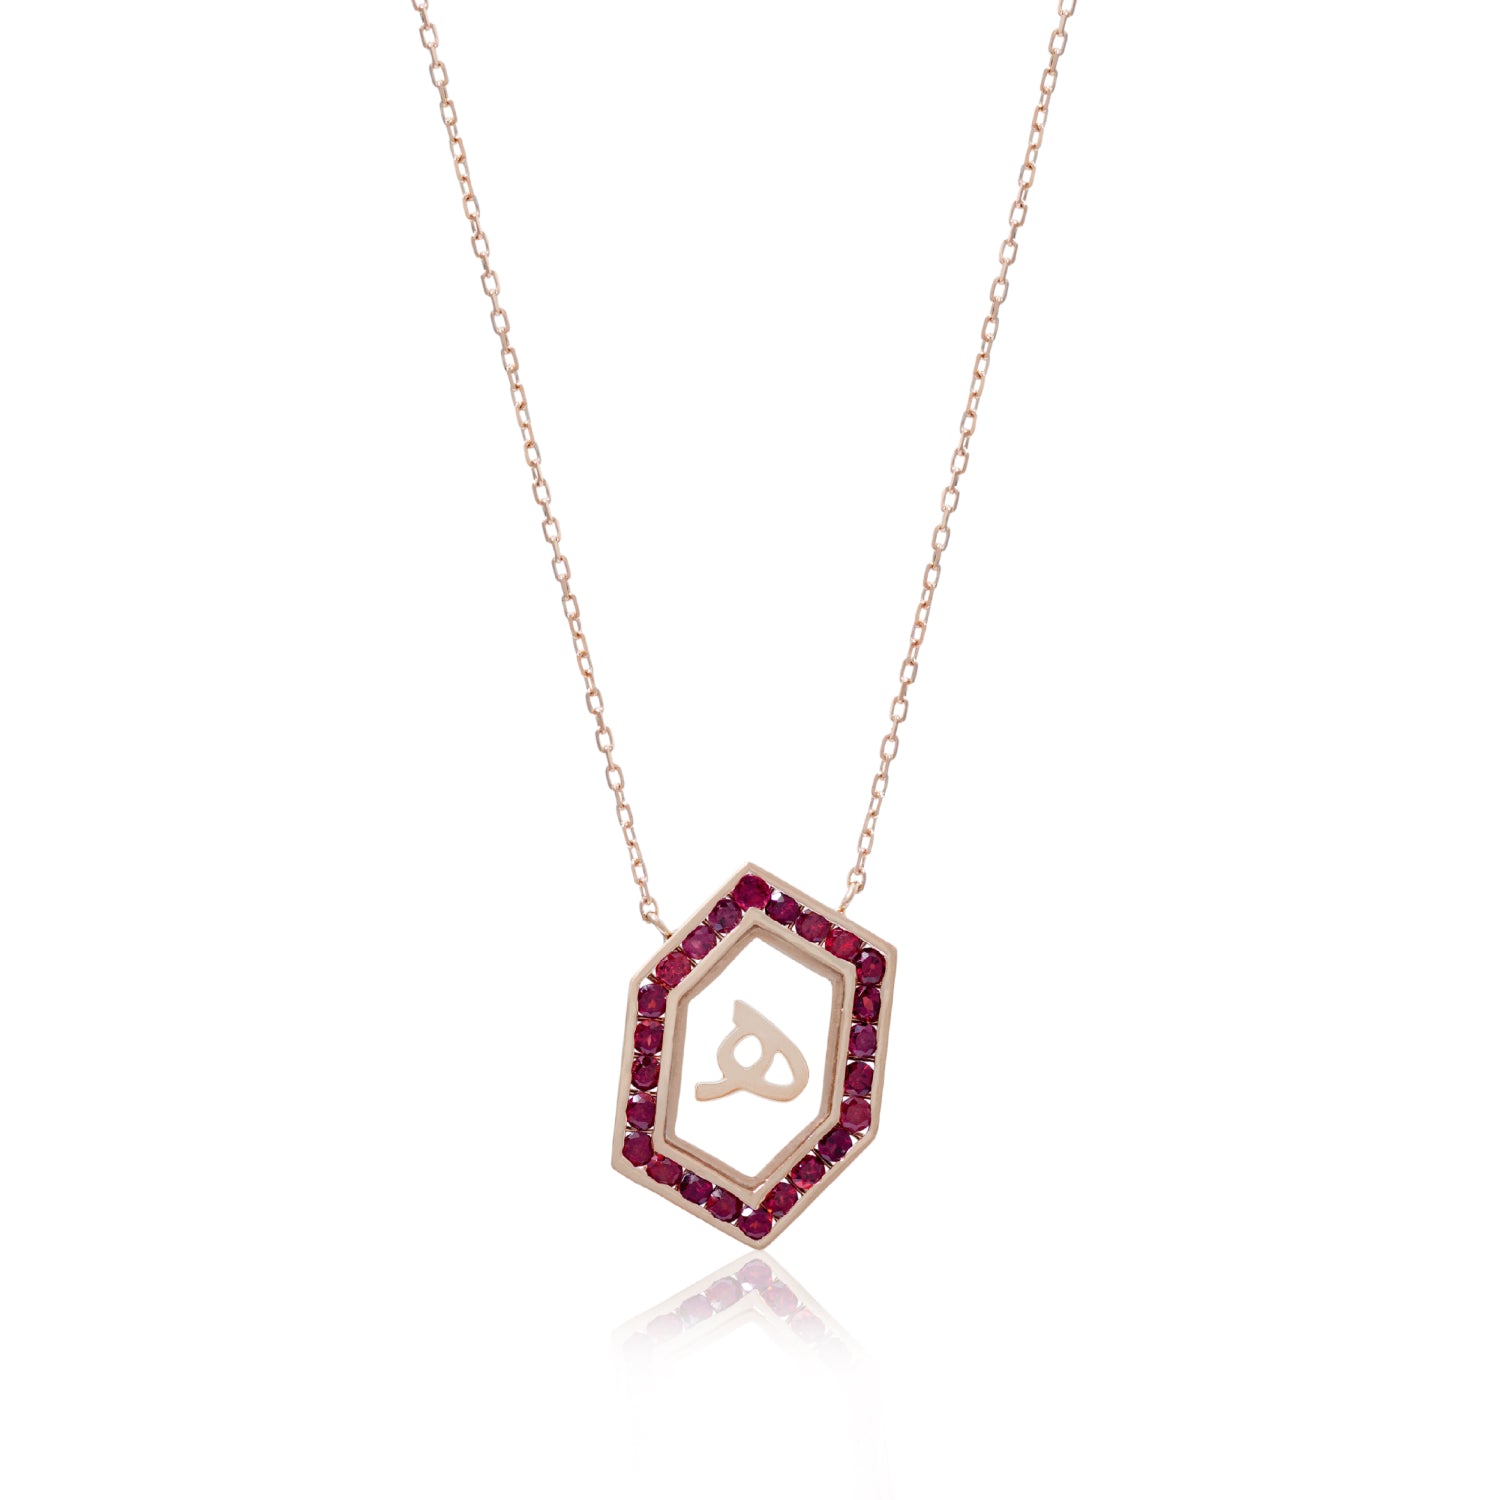 Qamoos 1.0 Letter هـ Ruby Necklace in Rose Gold